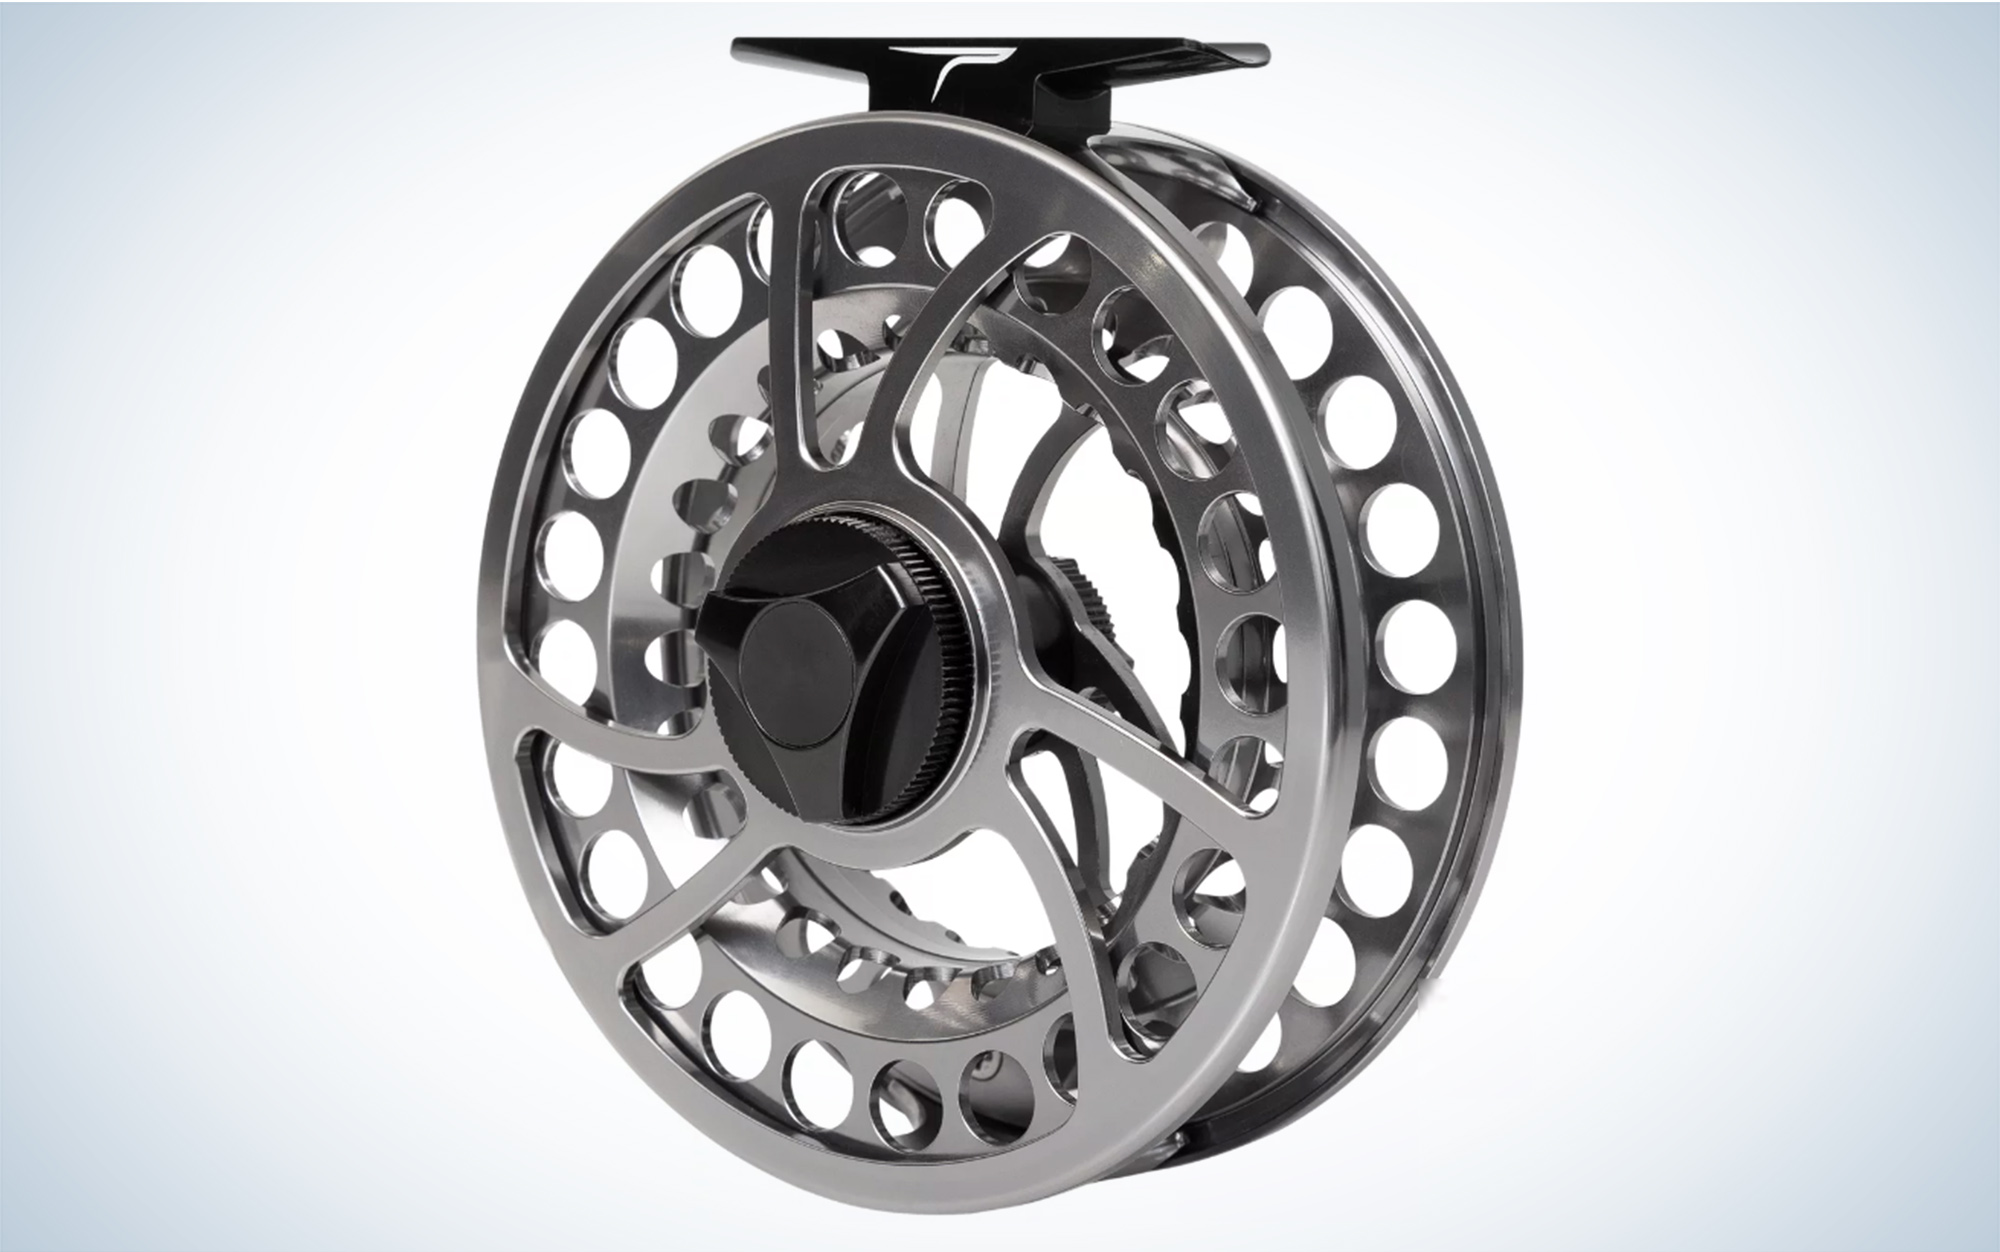 The 8 Best Saltwater Fly Reels - Ultimate Guide 2023 